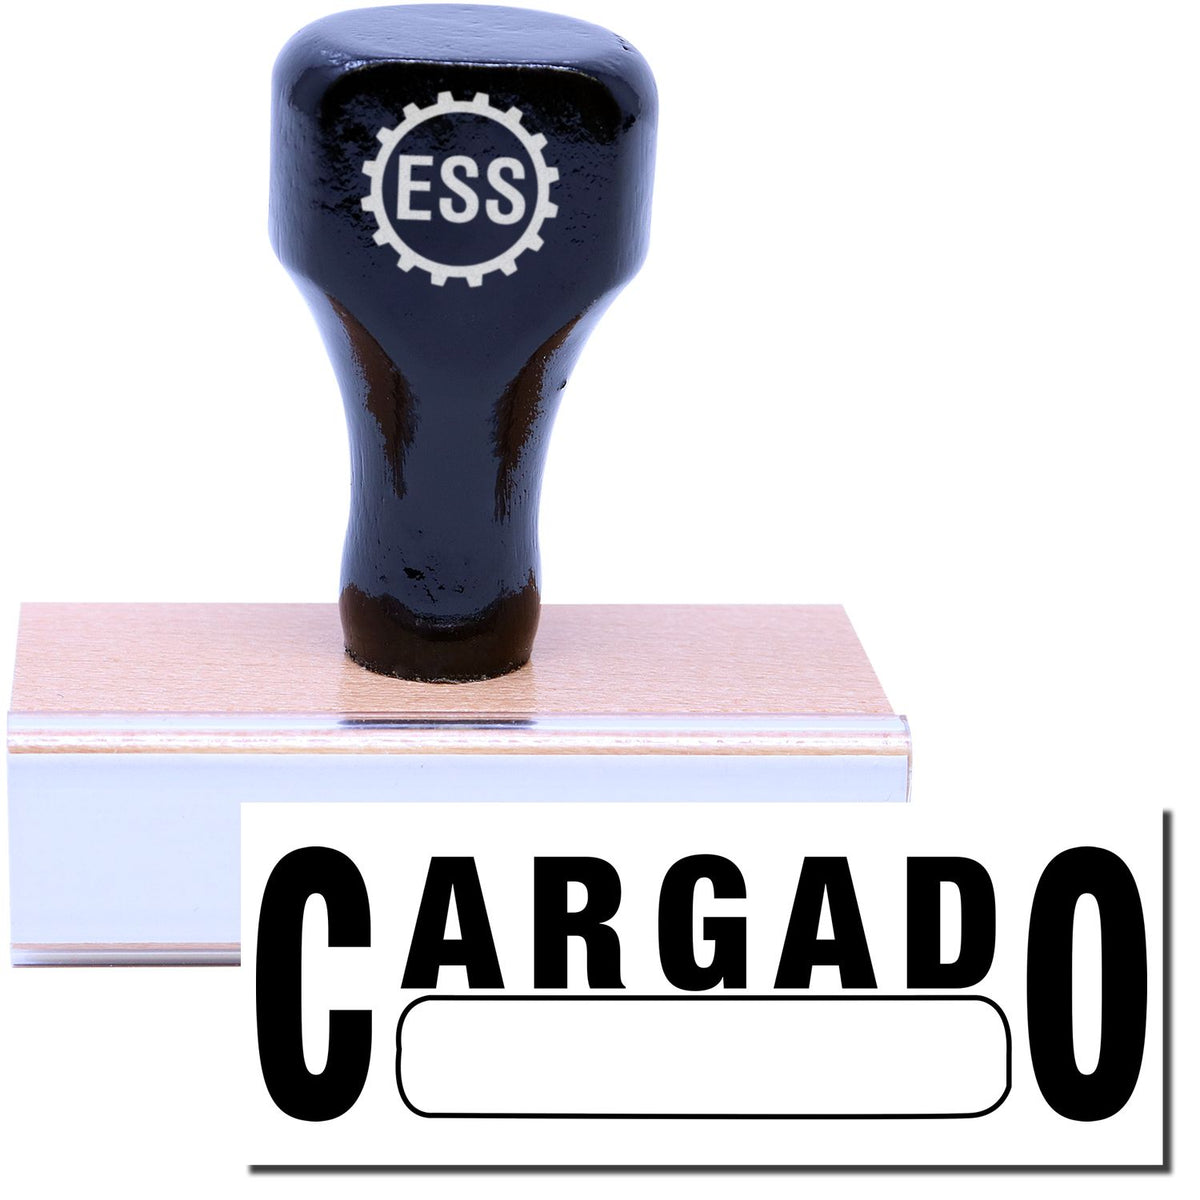 A stock office rubber stamp with a stamped image showing how the text &quot;CARGADO&quot; in a large font with a box is displayed after stamping.